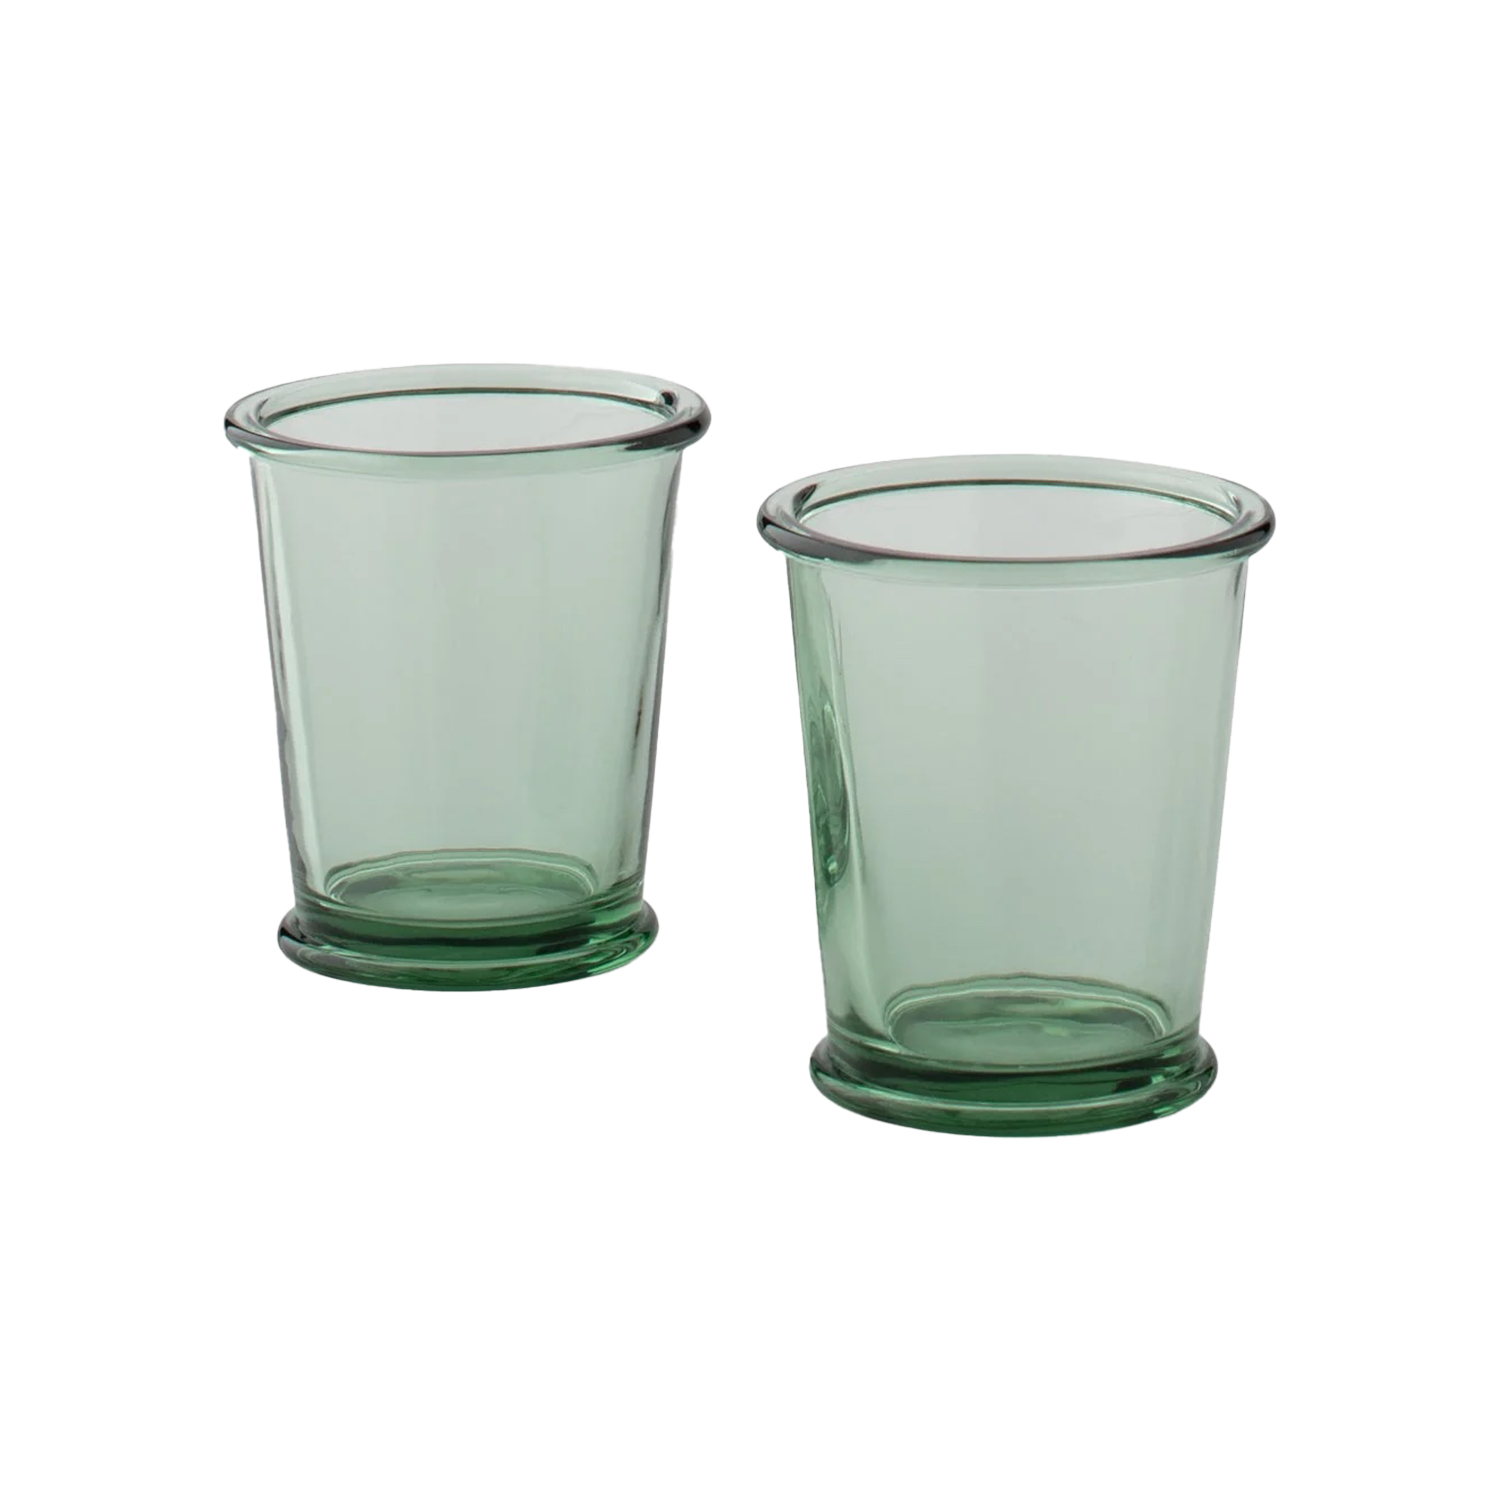 schoolhouse green glassware, two cups